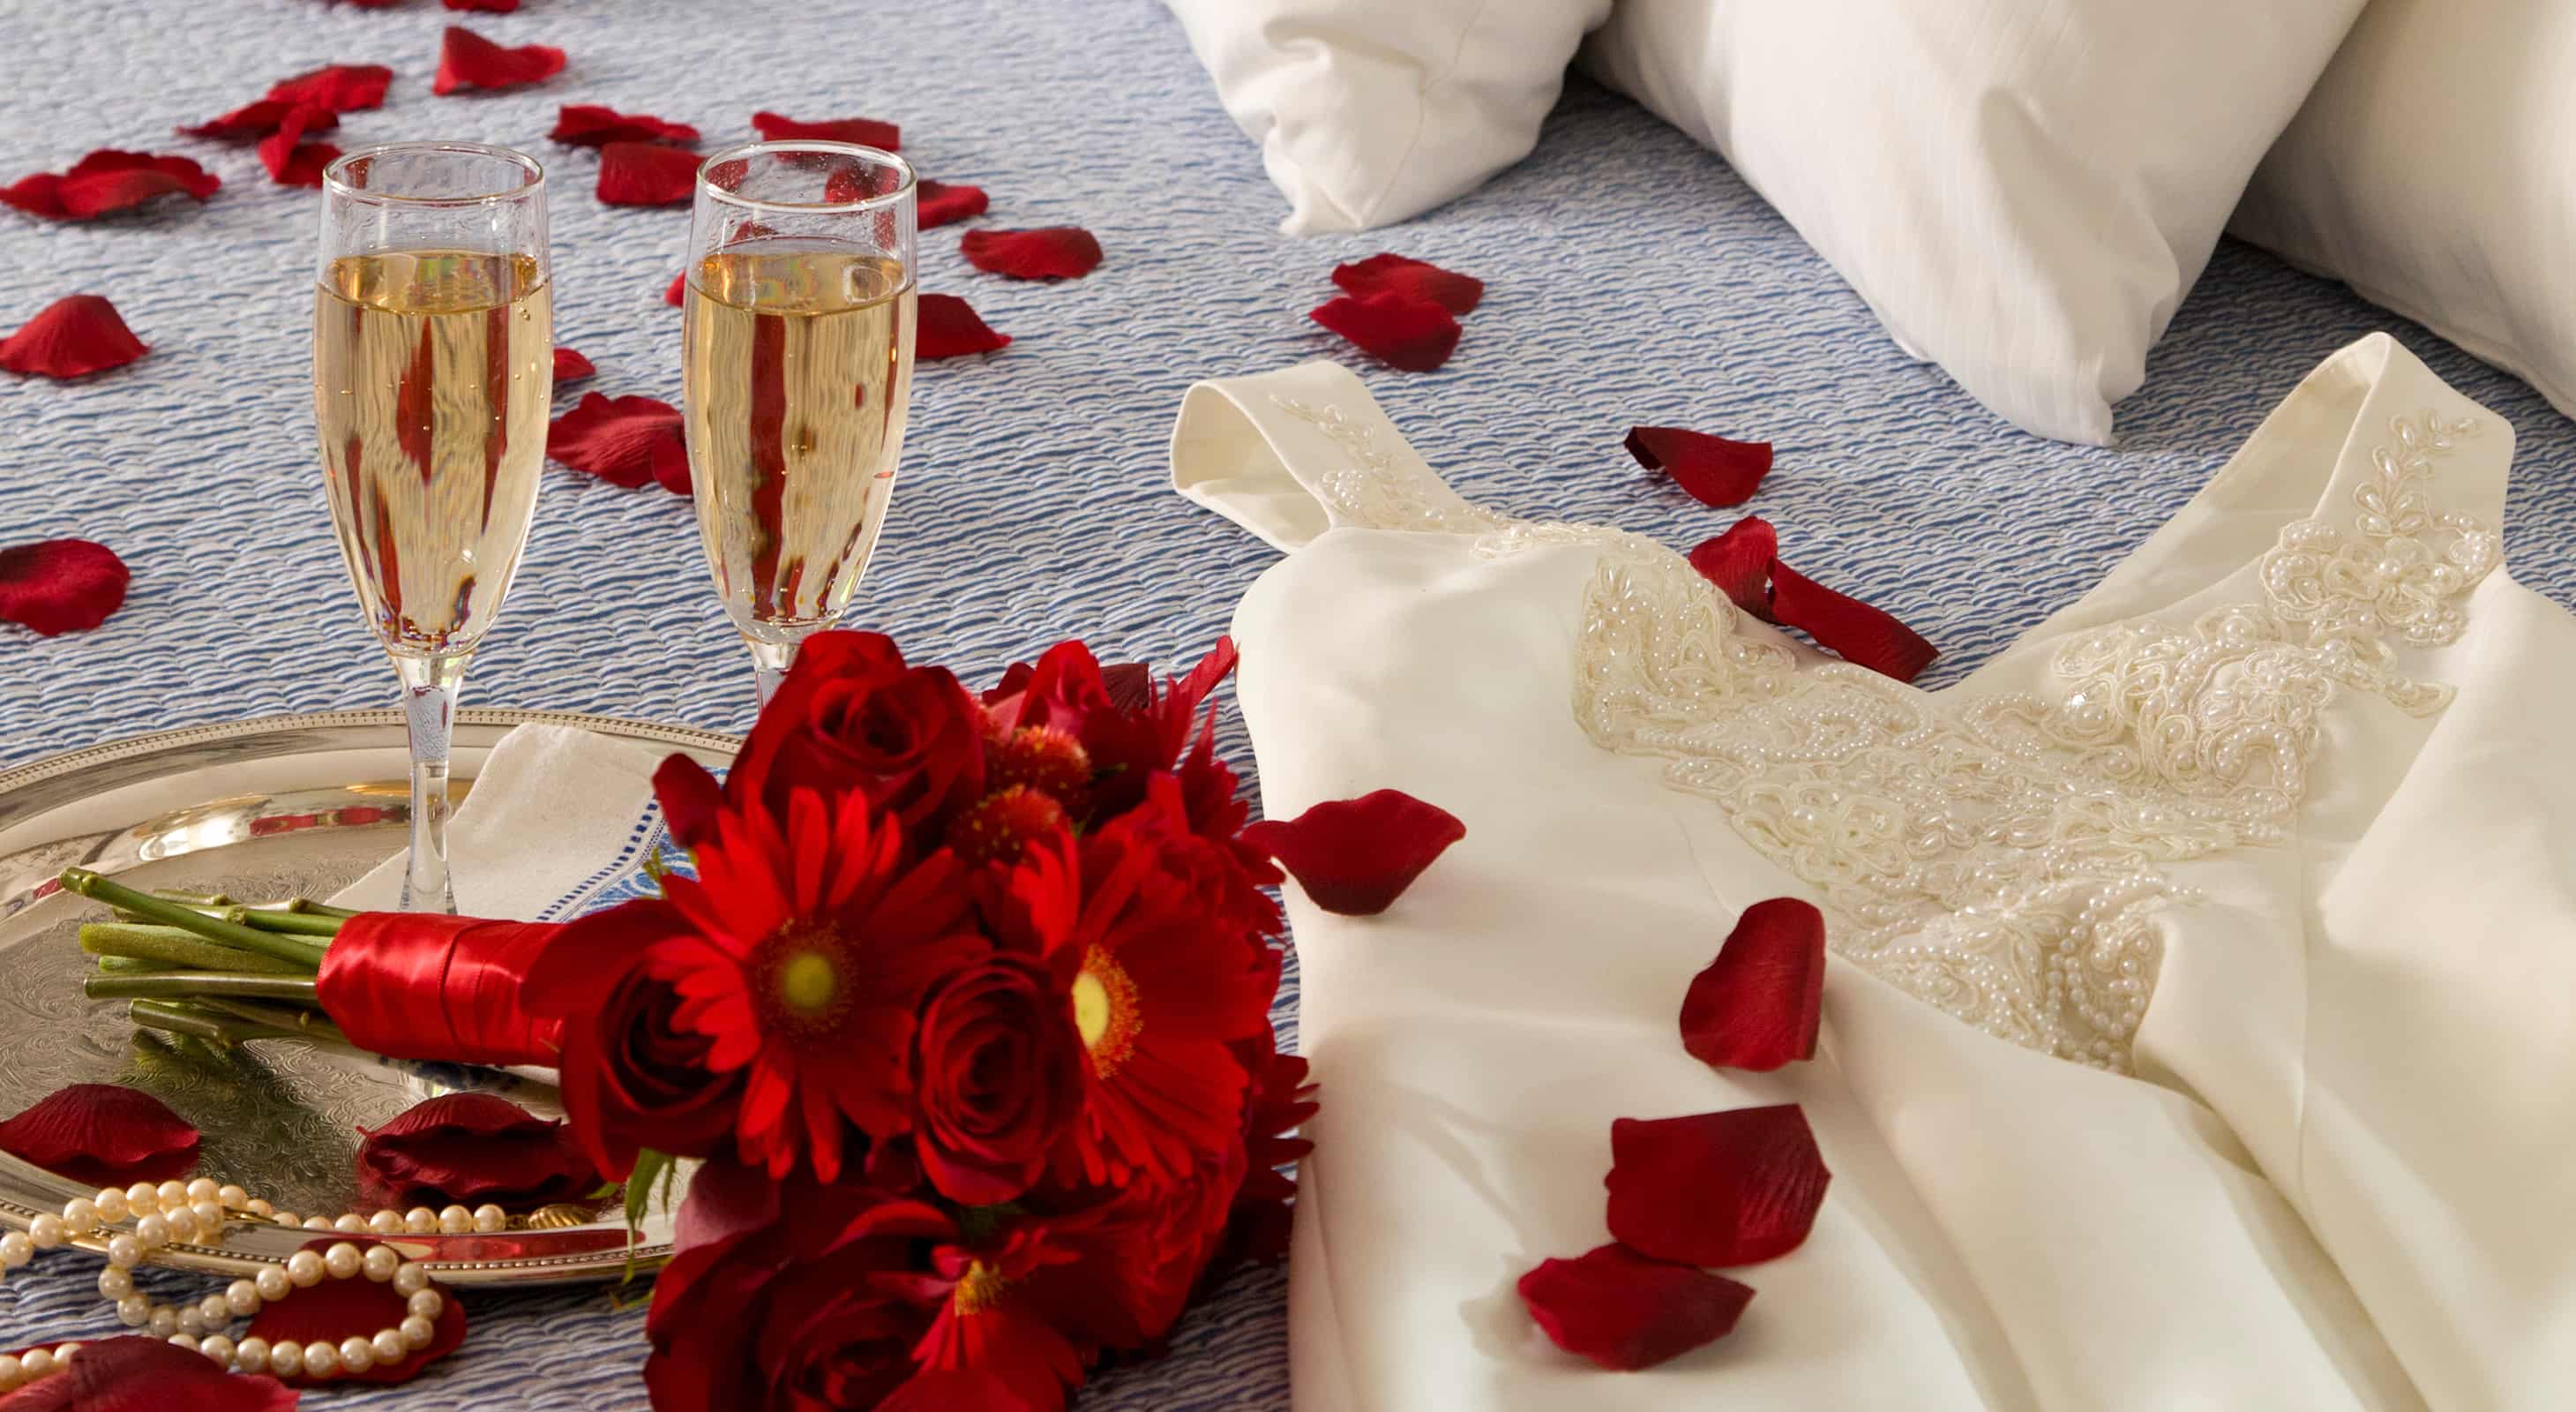 Champagne, flowers and wedding dress on bed